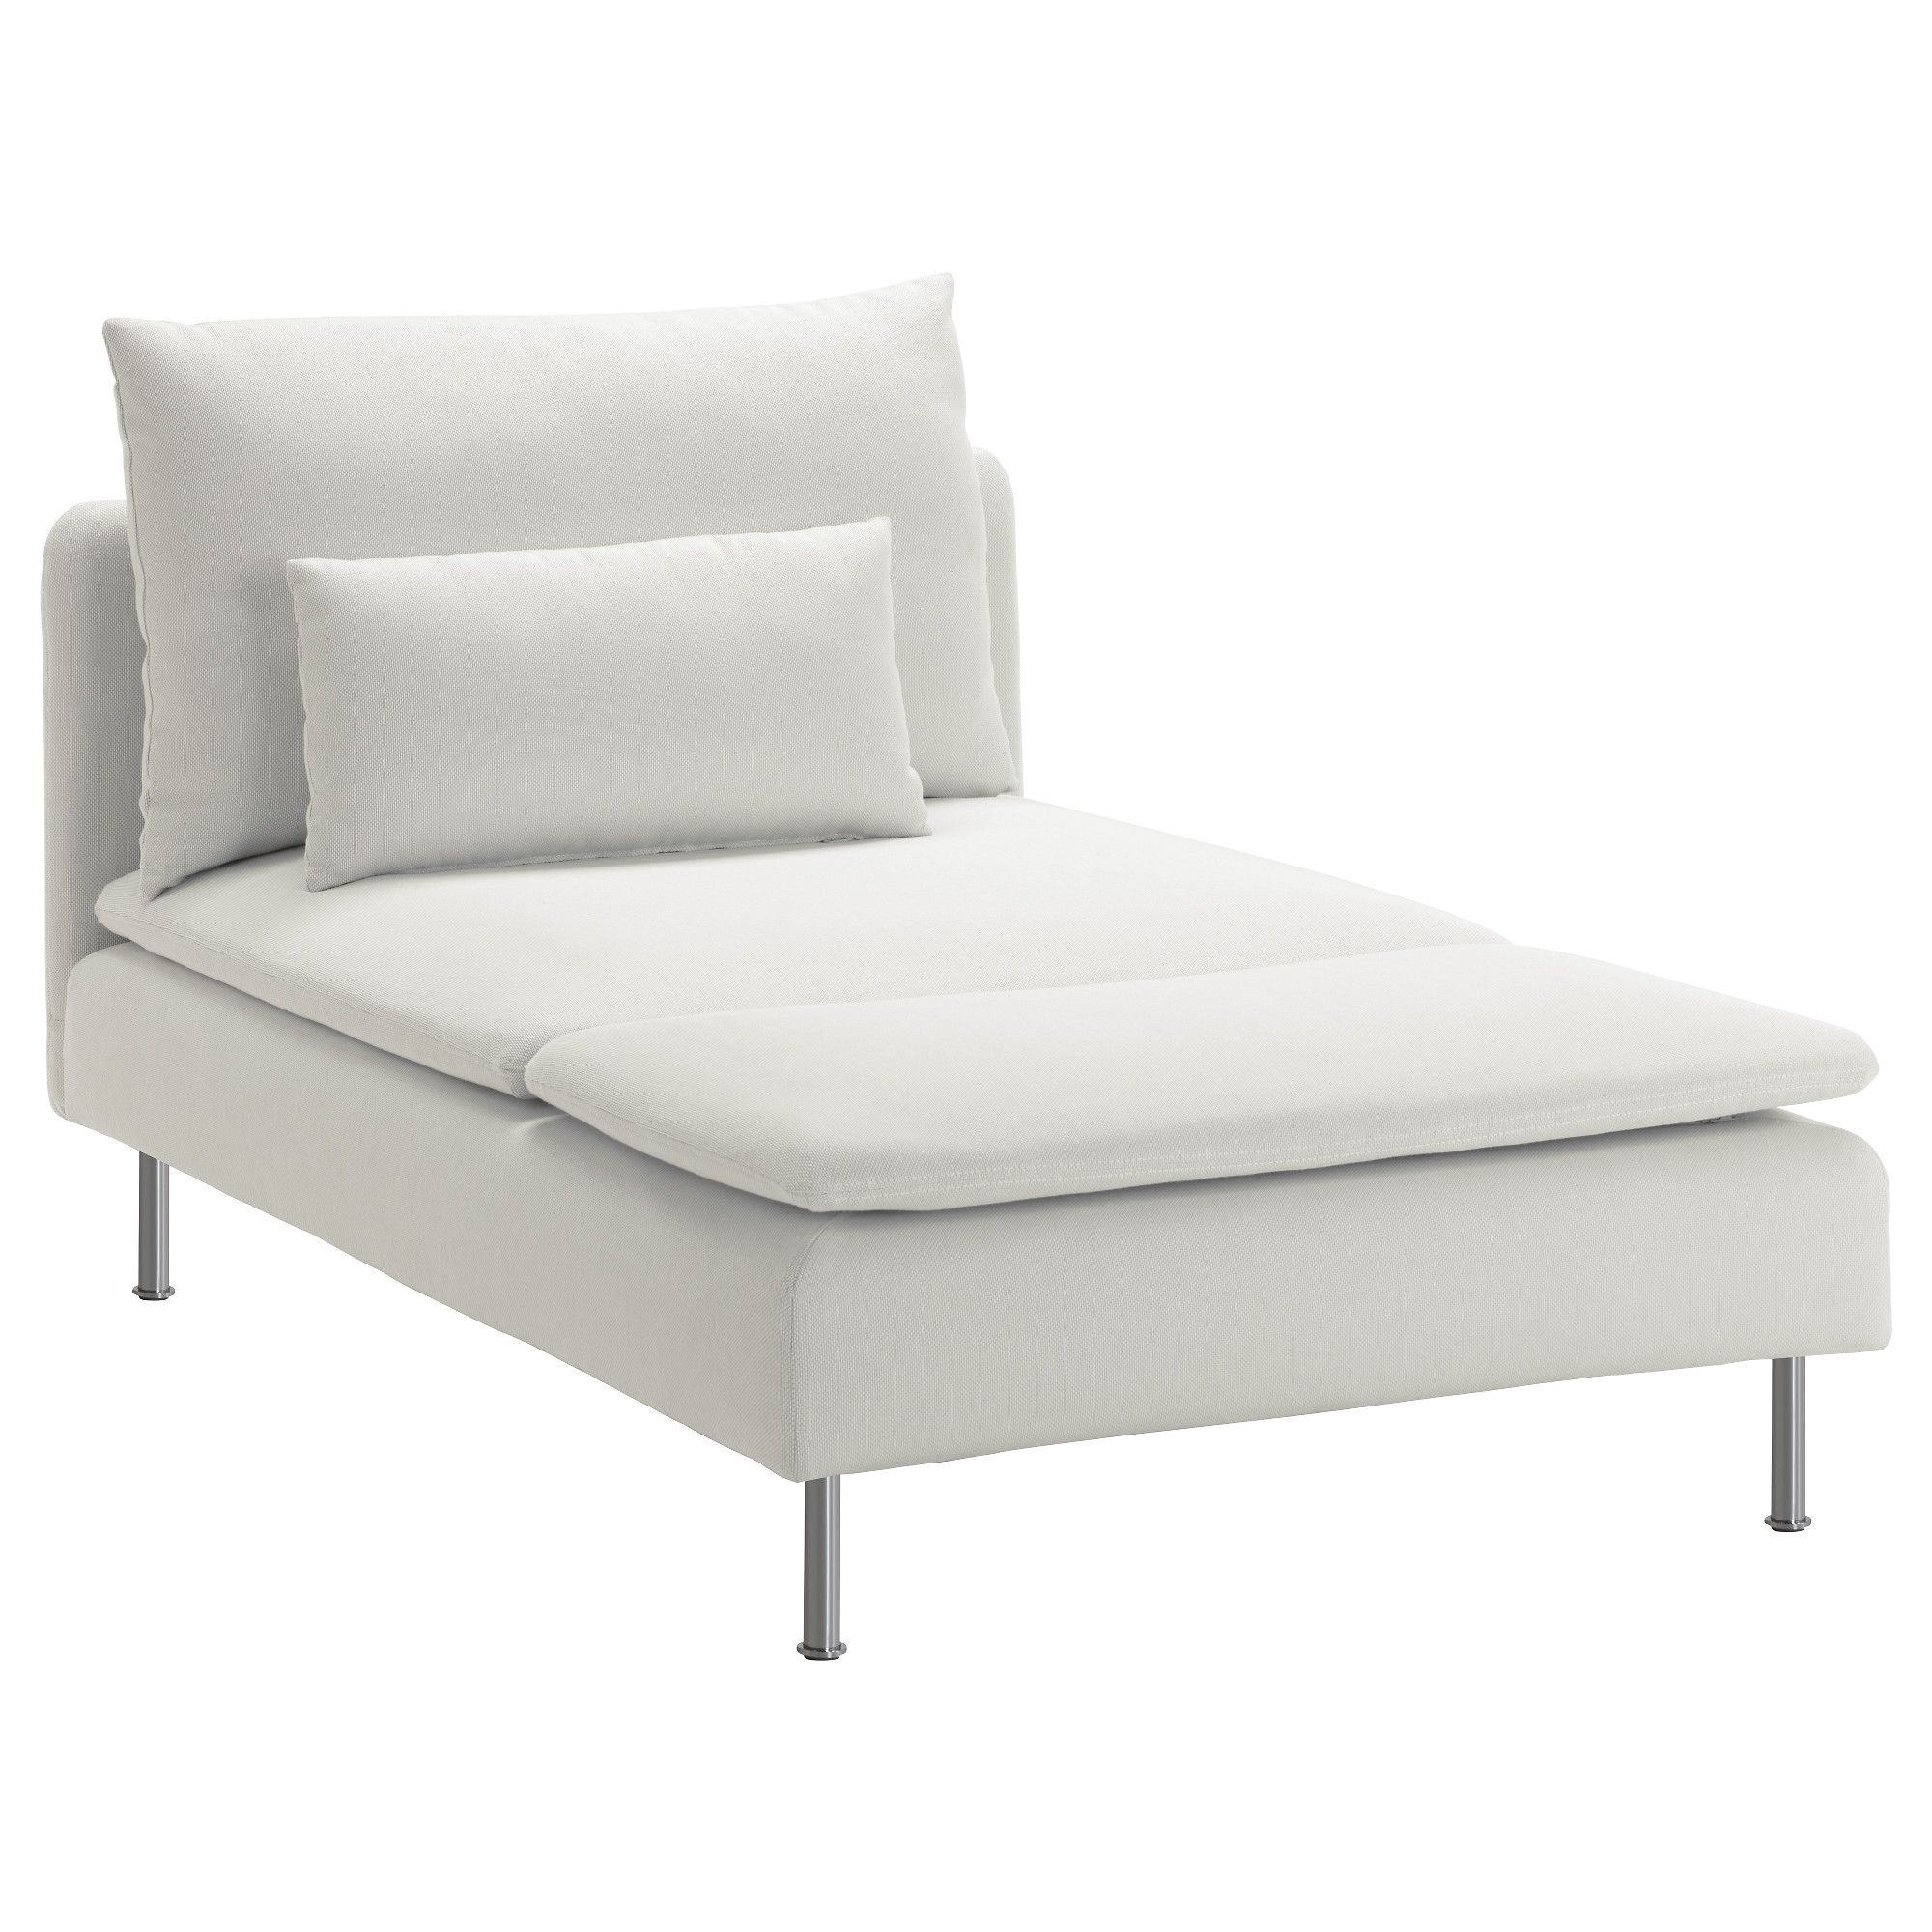 Fashionable Ikea Chaise Longues For Söderhamn Chaise Longue Finnsta White – Ikea (View 2 of 15)